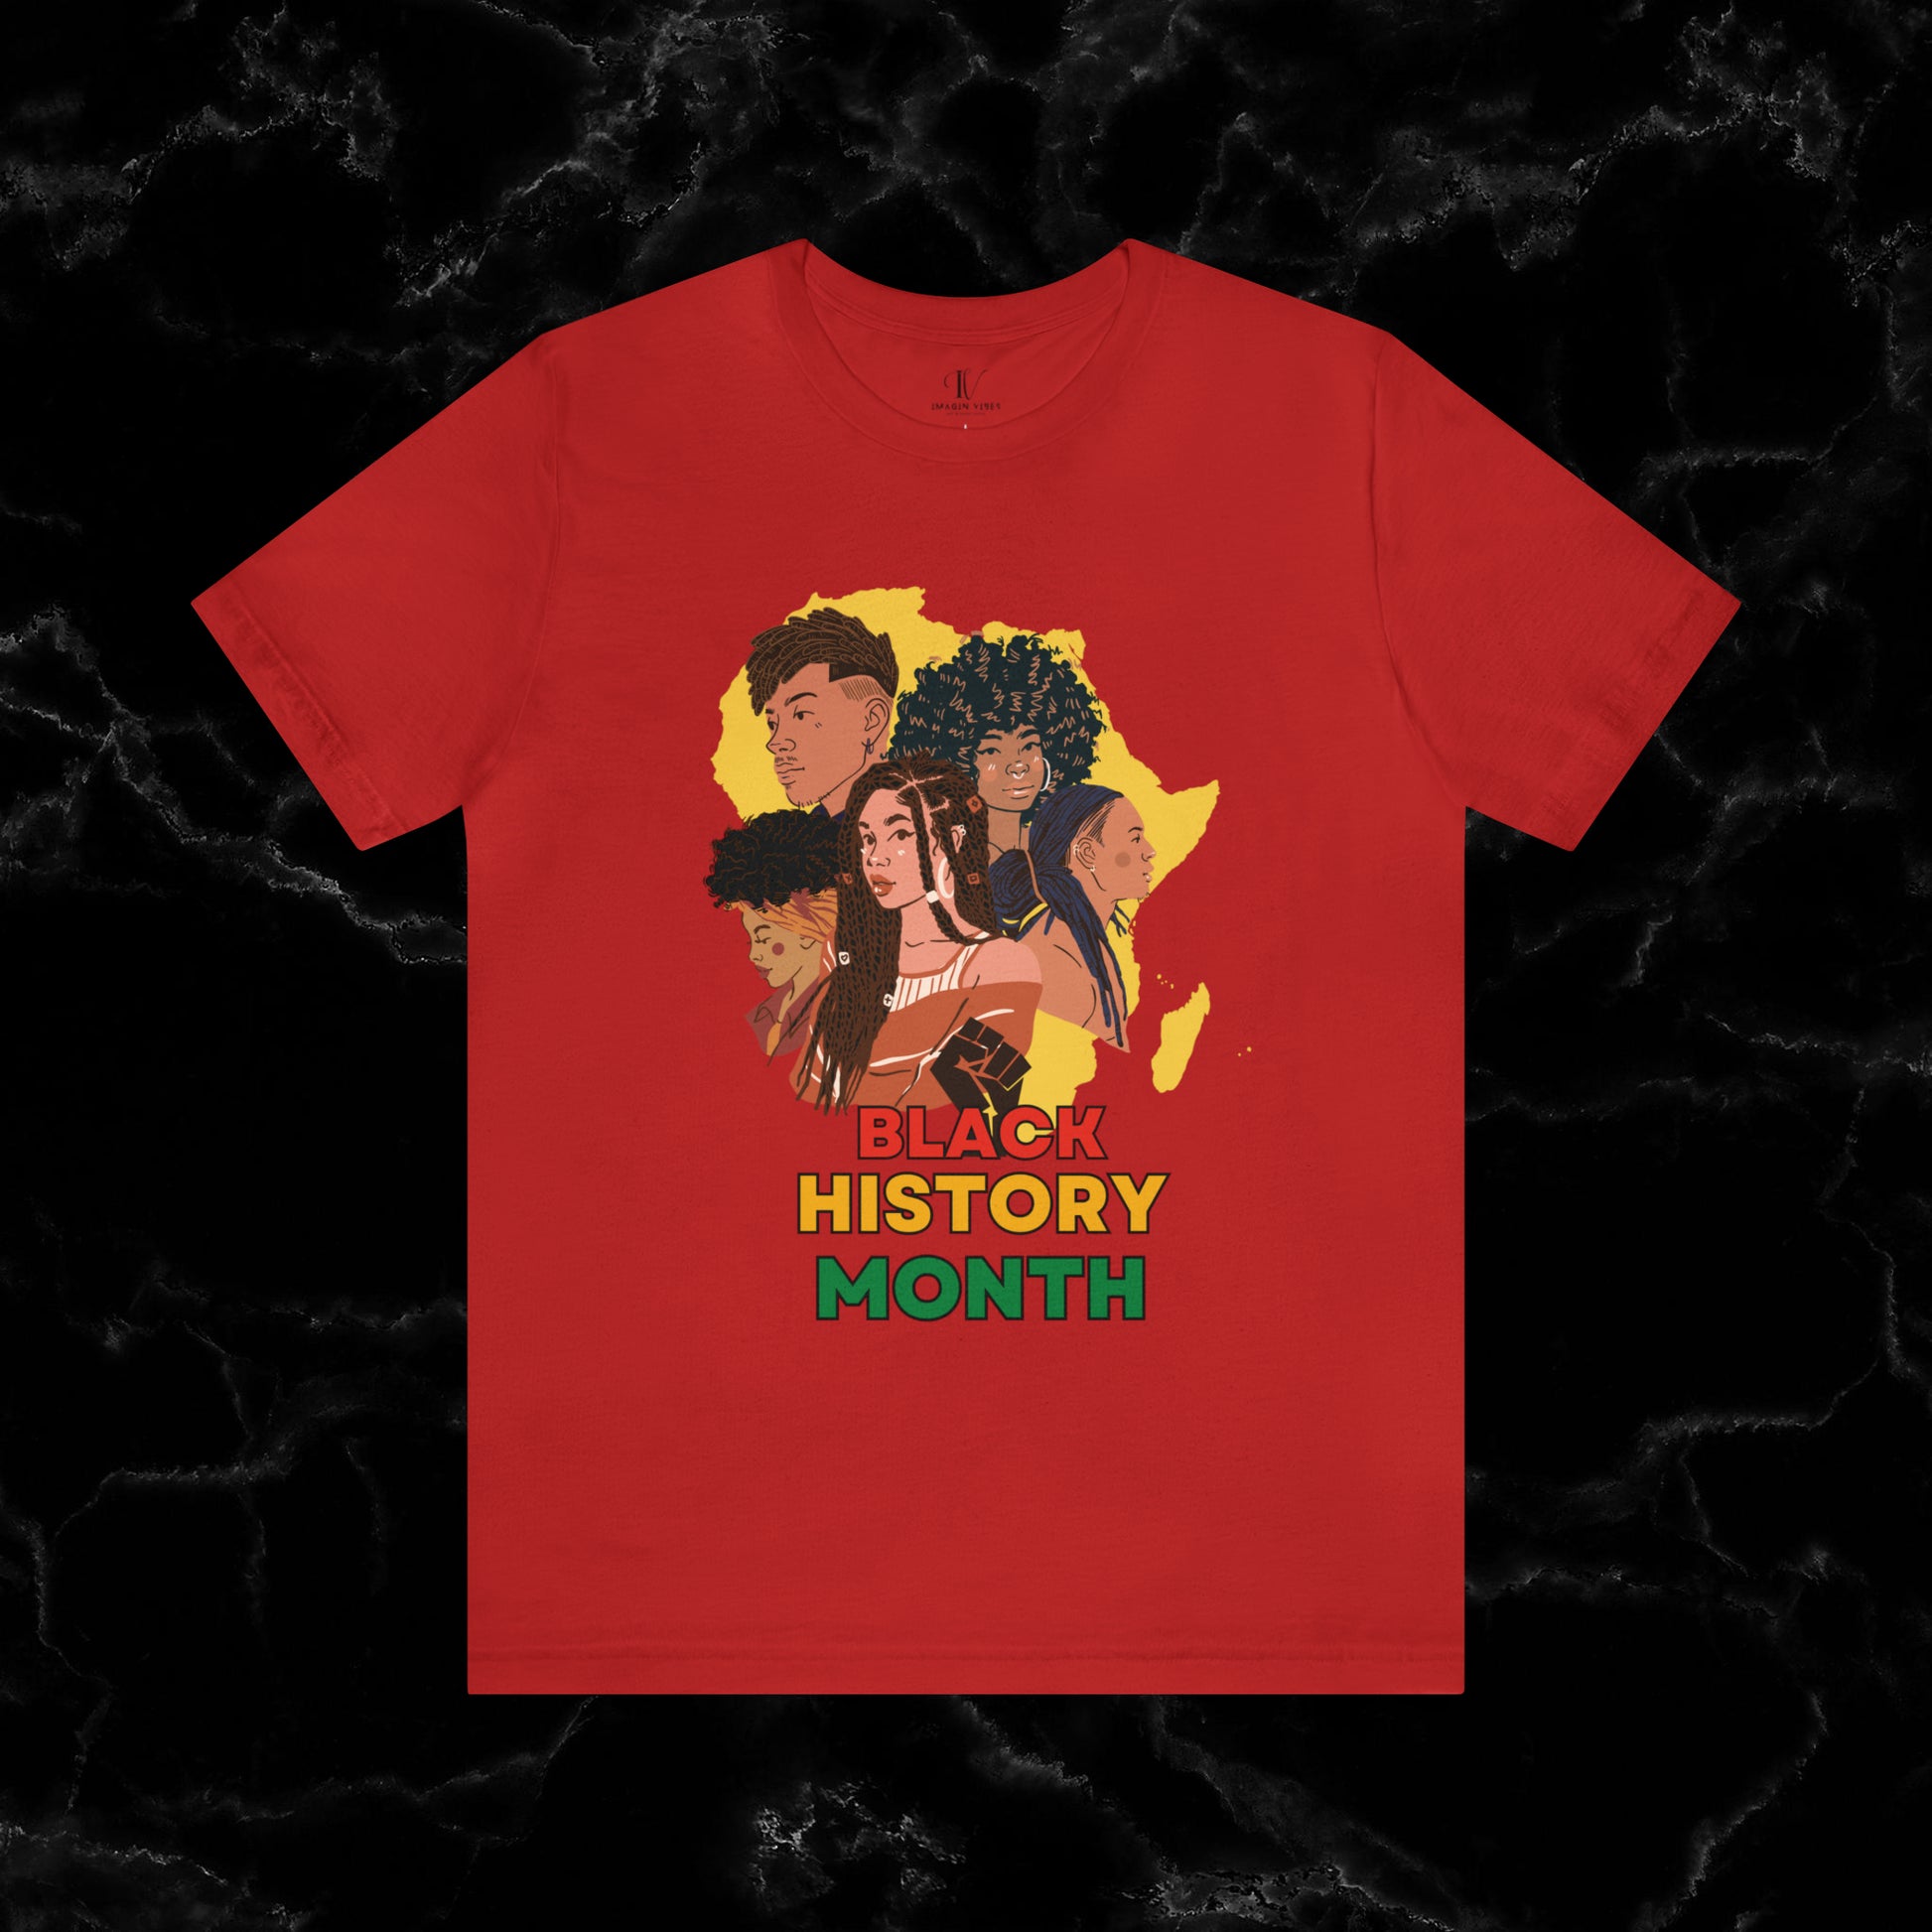 Trendy Black History Month Shirts - Celebrating African American Pride and Heritage T-Shirt Red XS 